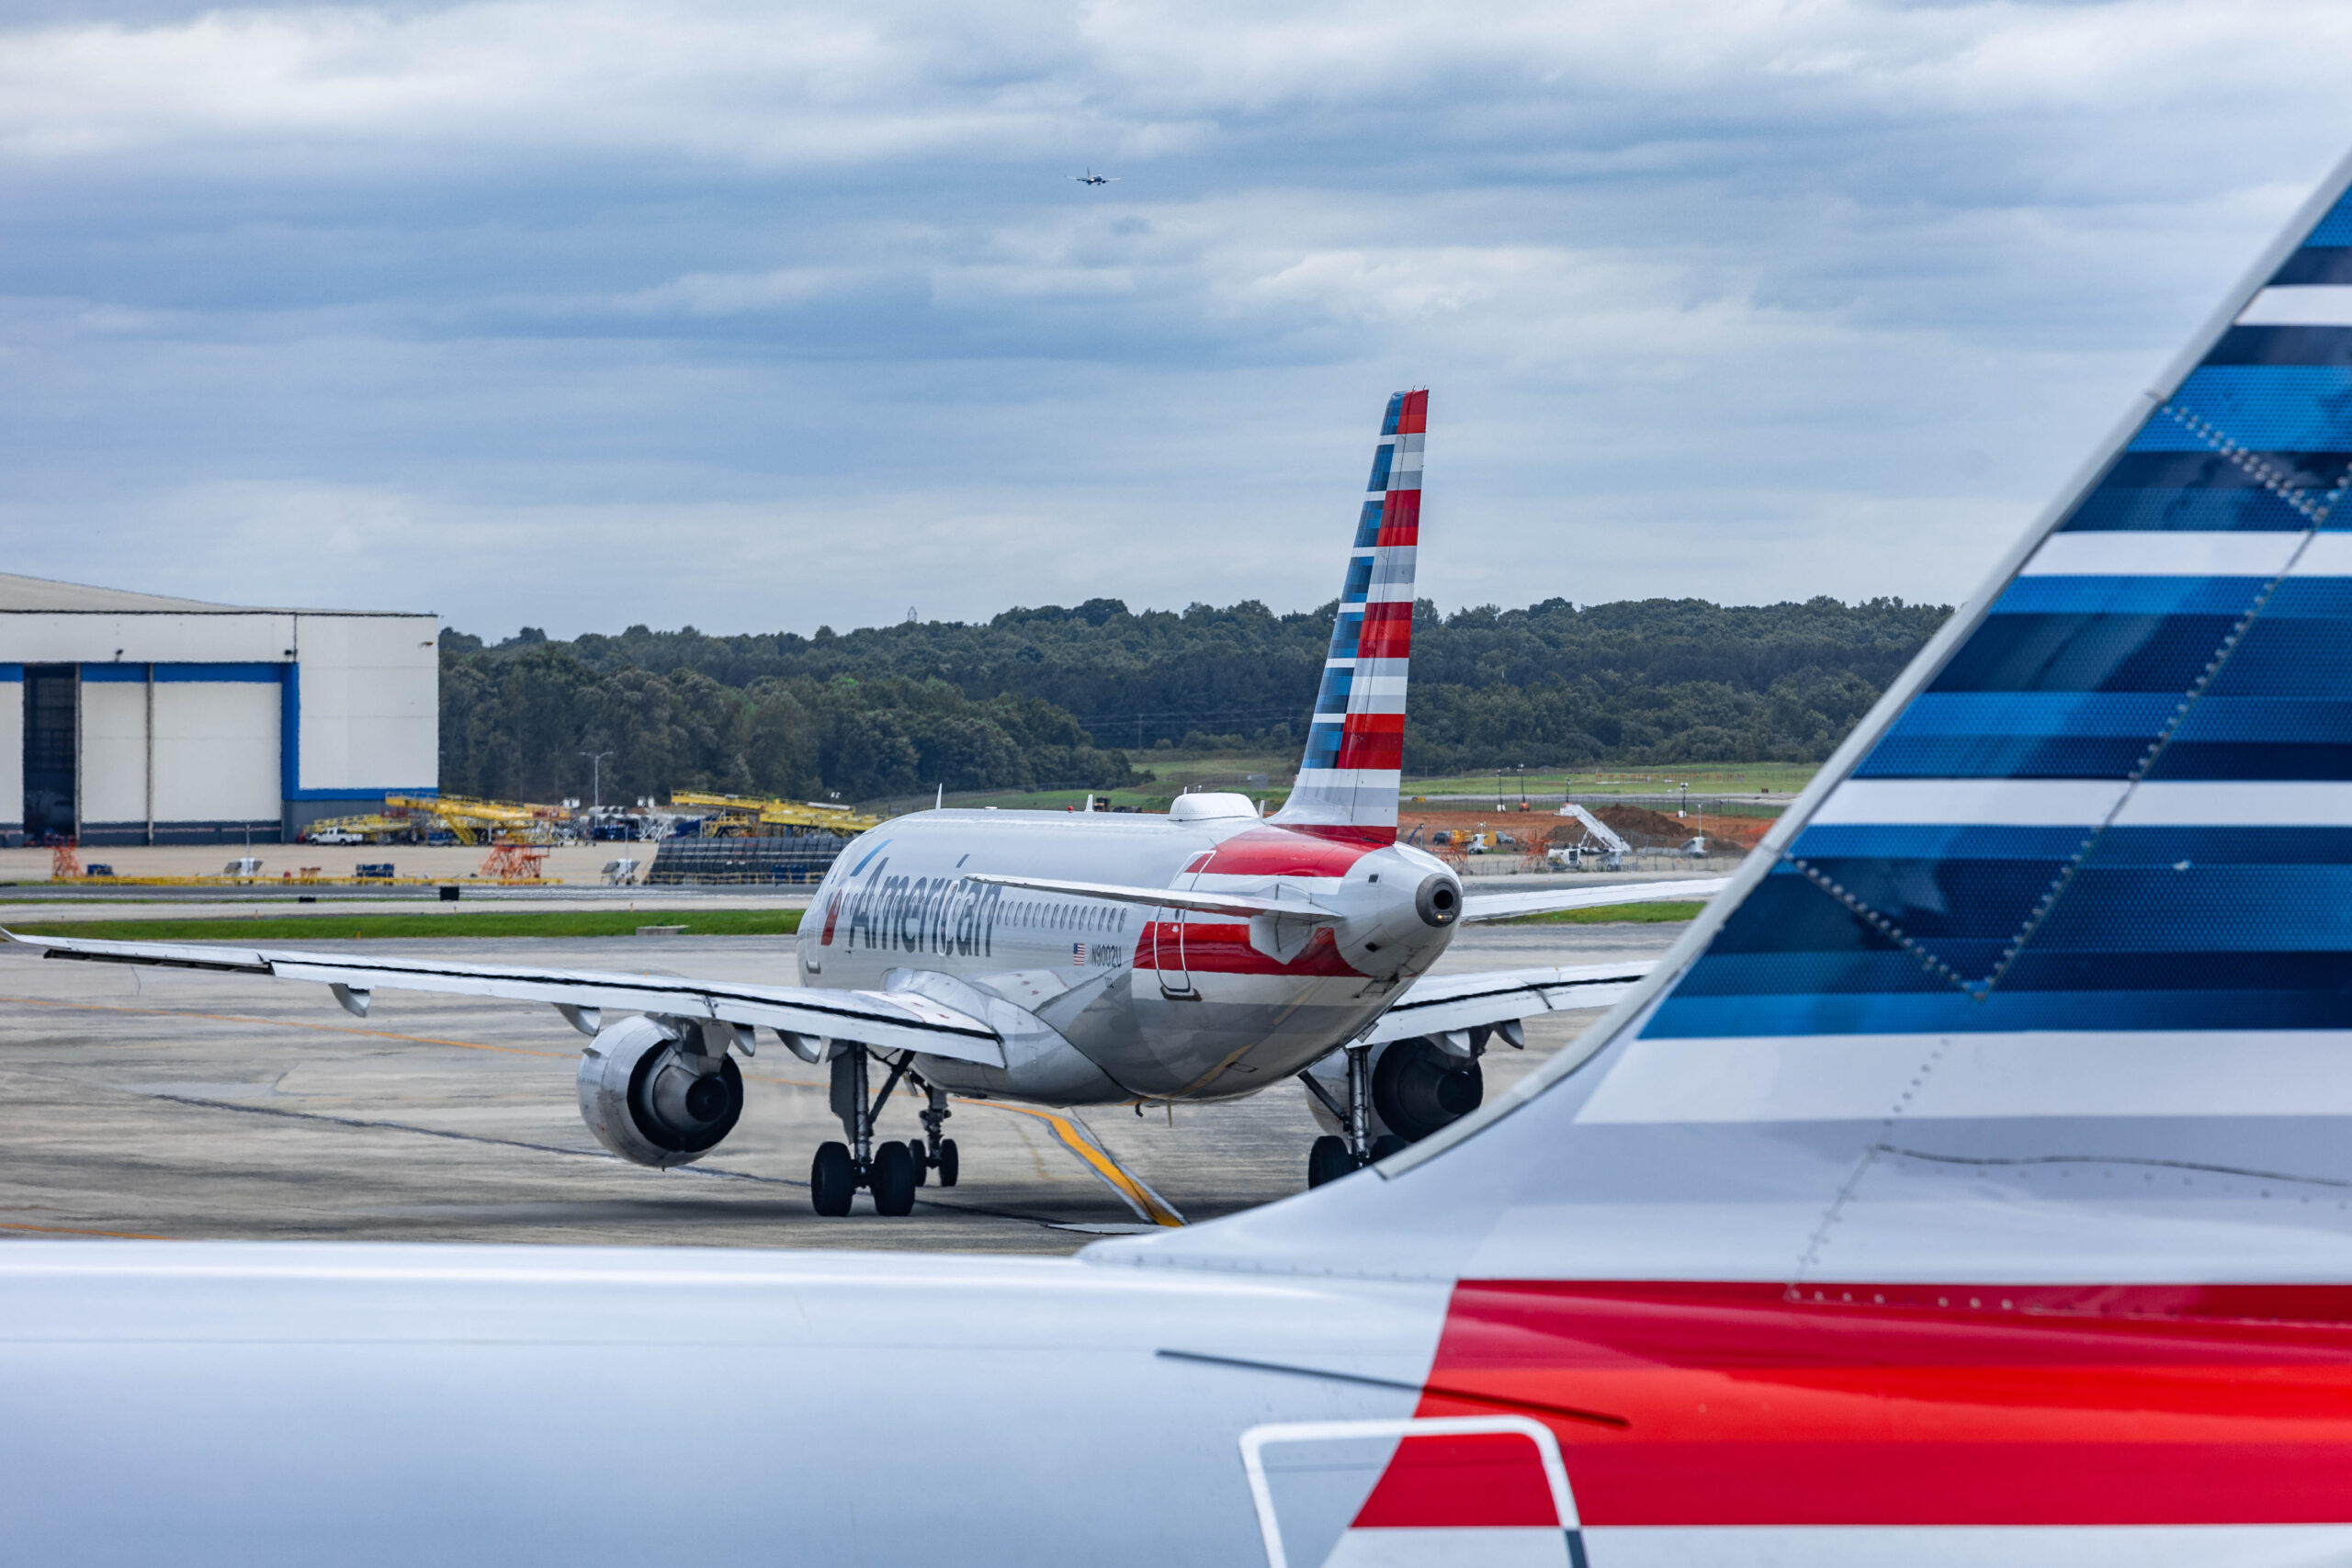 Charlotte Douglas International Airport in North Carolina will receive 43 million USD to construct a new 6,400-foot end-around taxiway